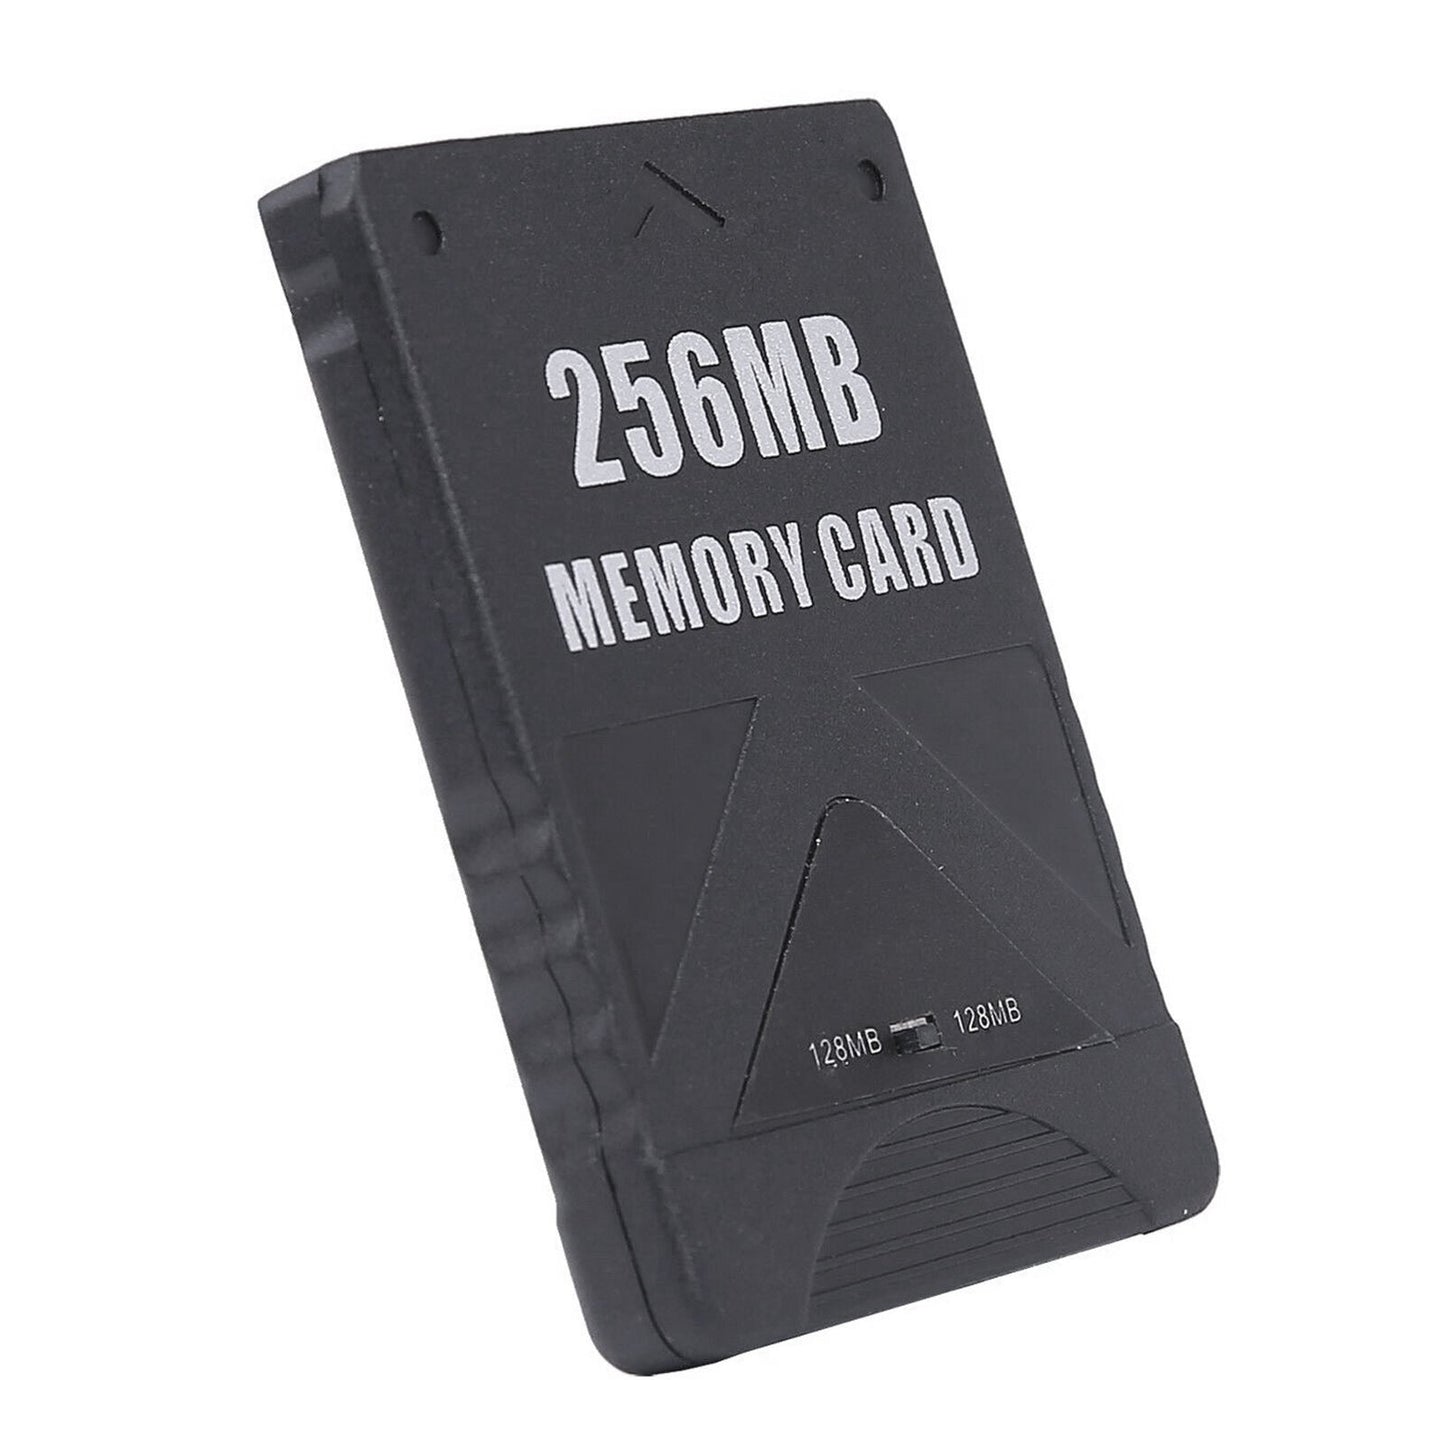 256MB Megabyte Memory Card for Sony PS2 PlayStation 2 Bland New